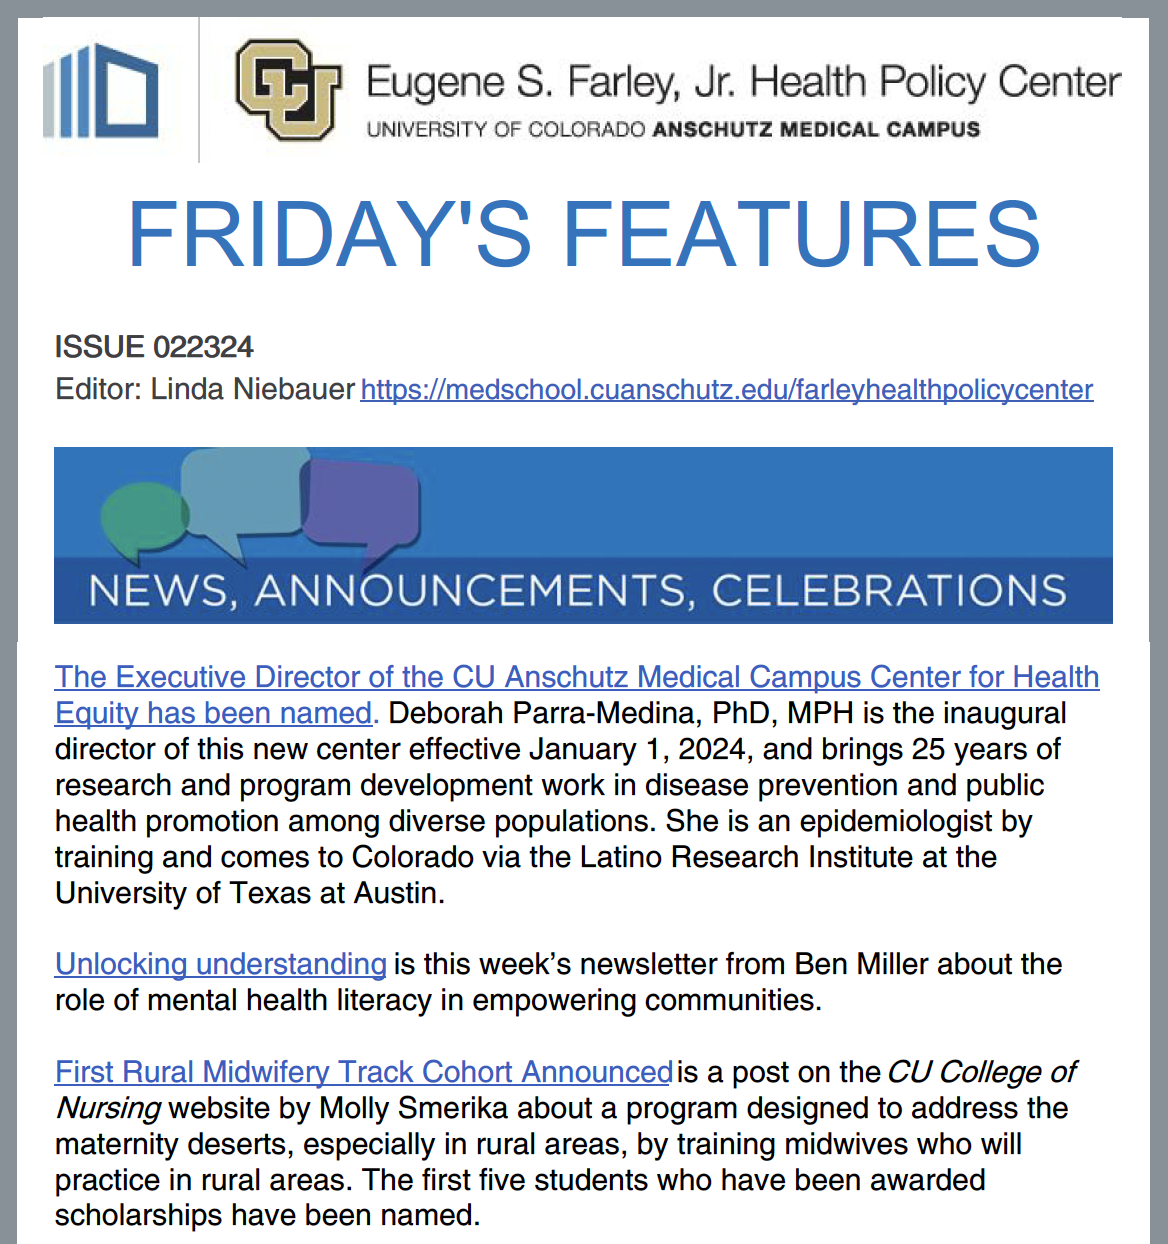 Friday's Features February 23, 2024